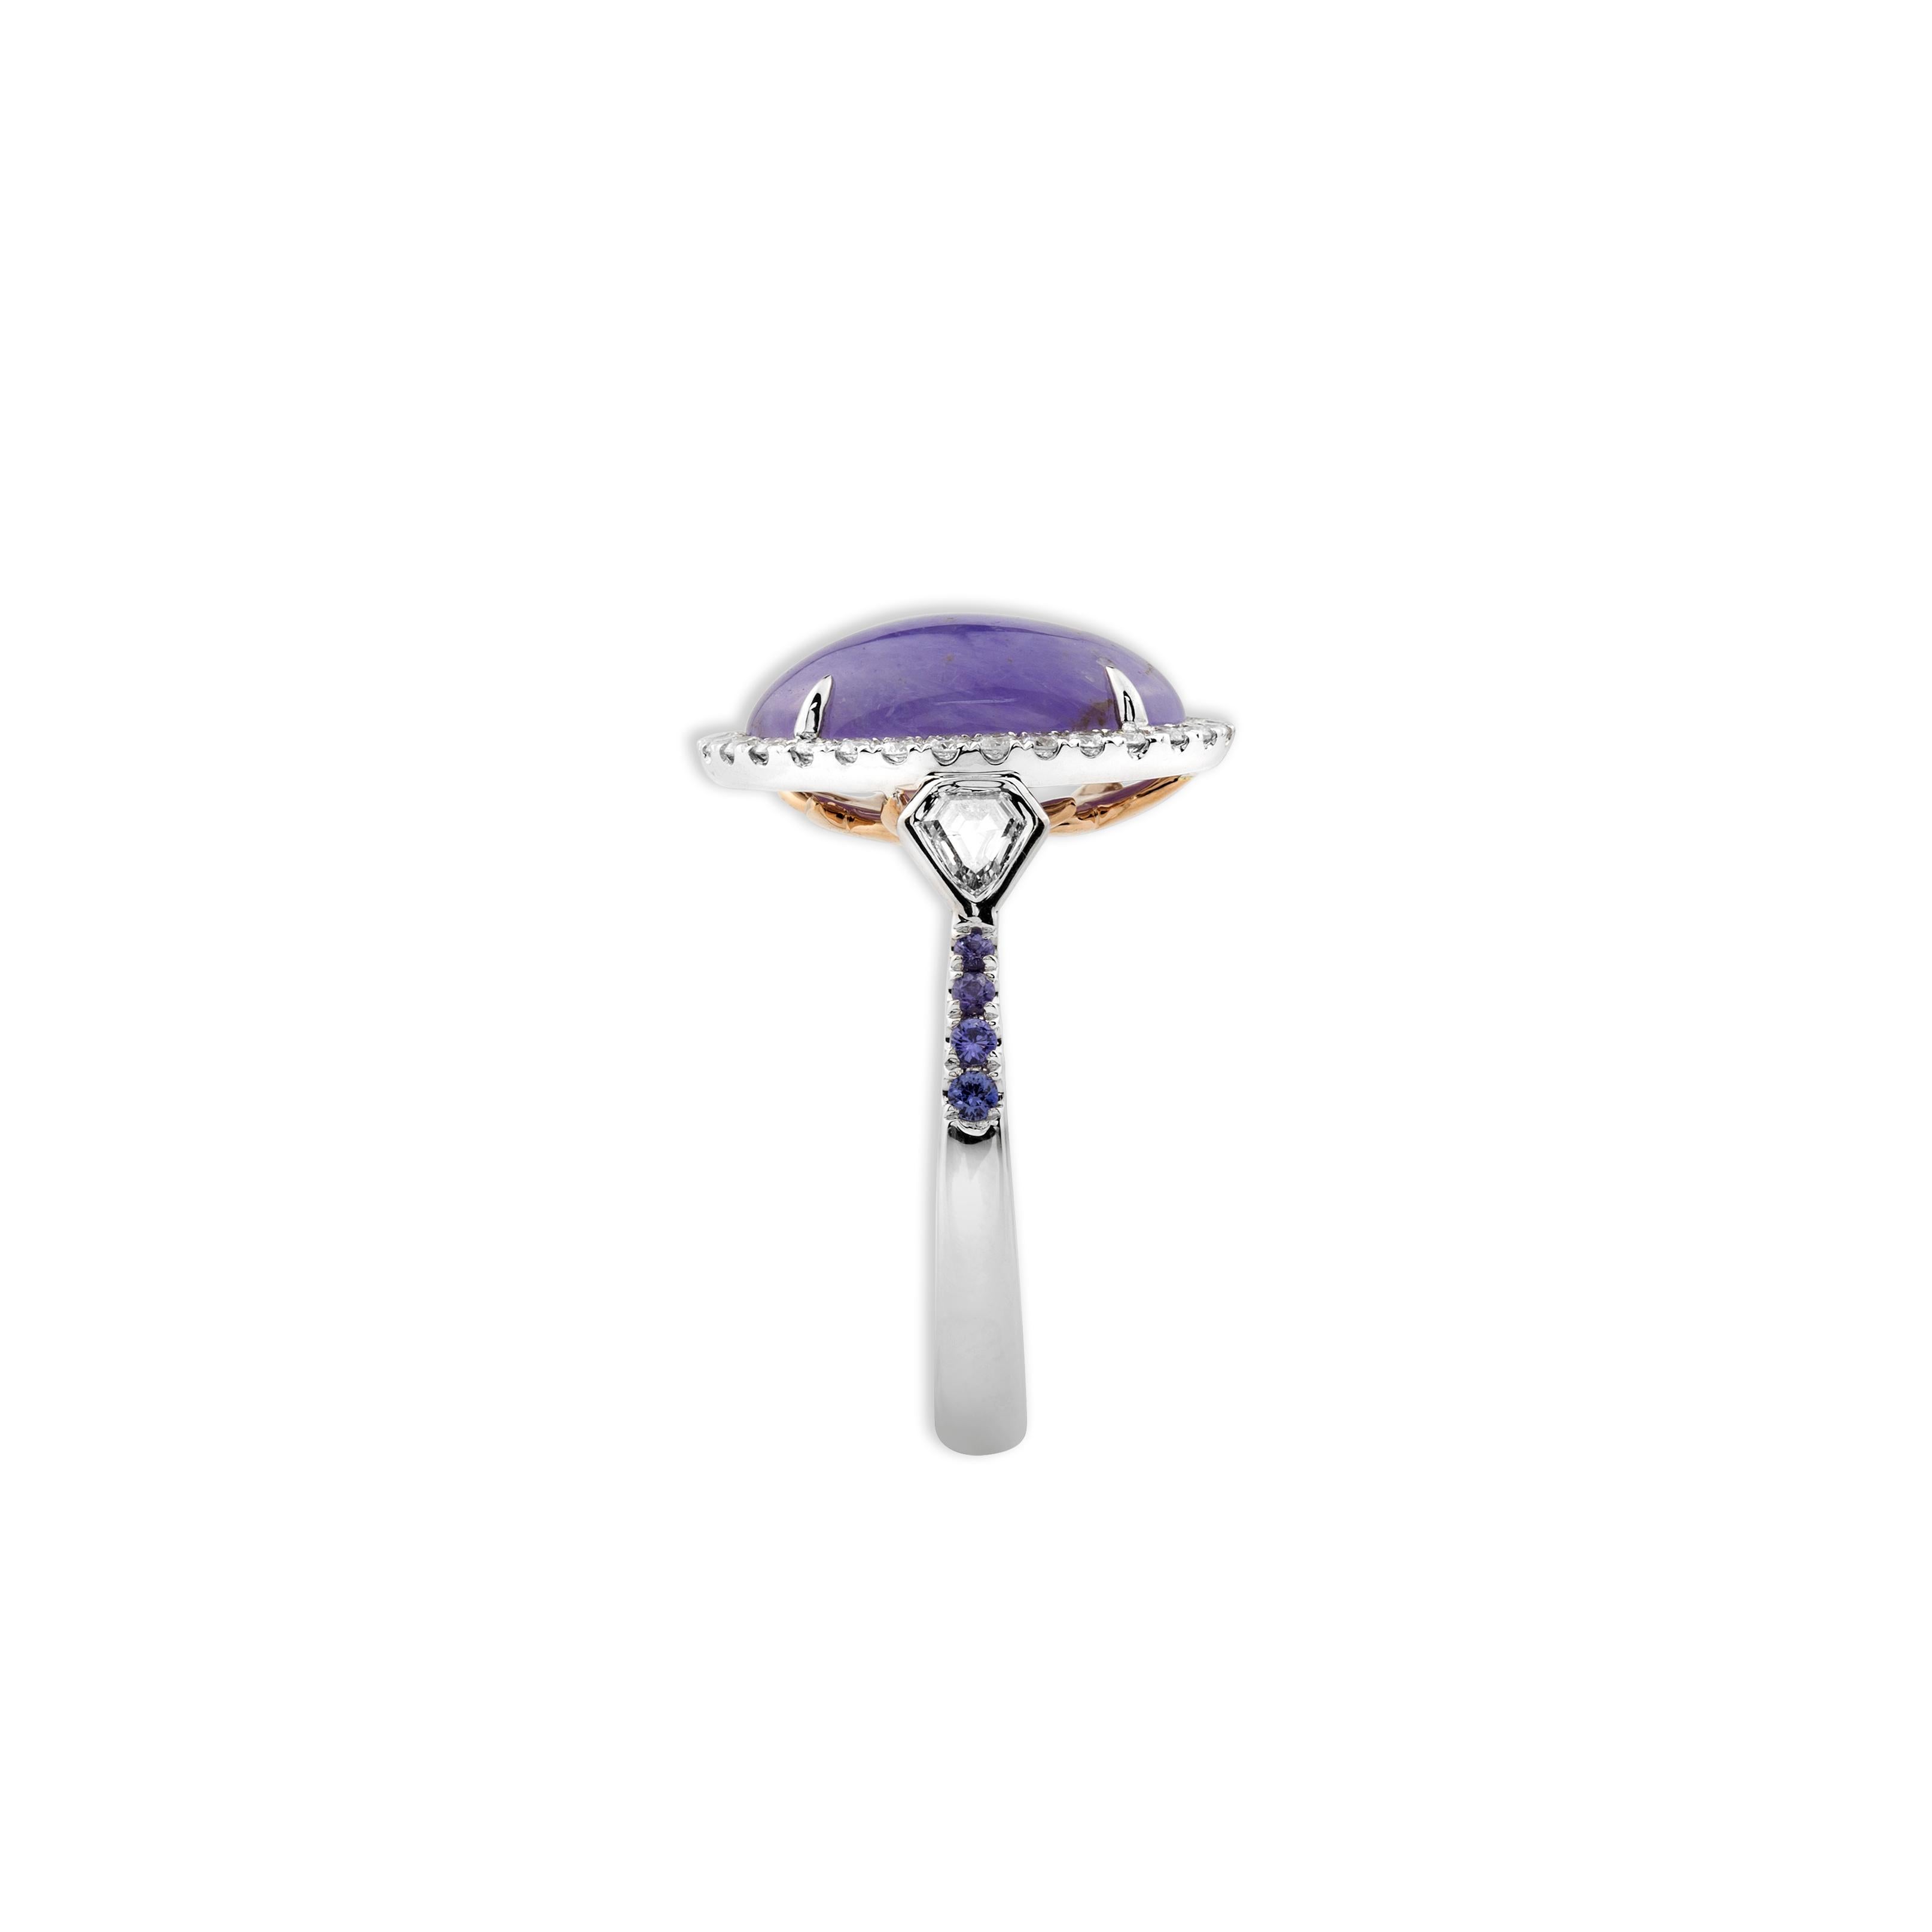 White Diamonds (Round and Kite Cut) 0.60 cts, Purple Sapphires 0.11 cts, Oval Lavender Jade 10.18 cts 